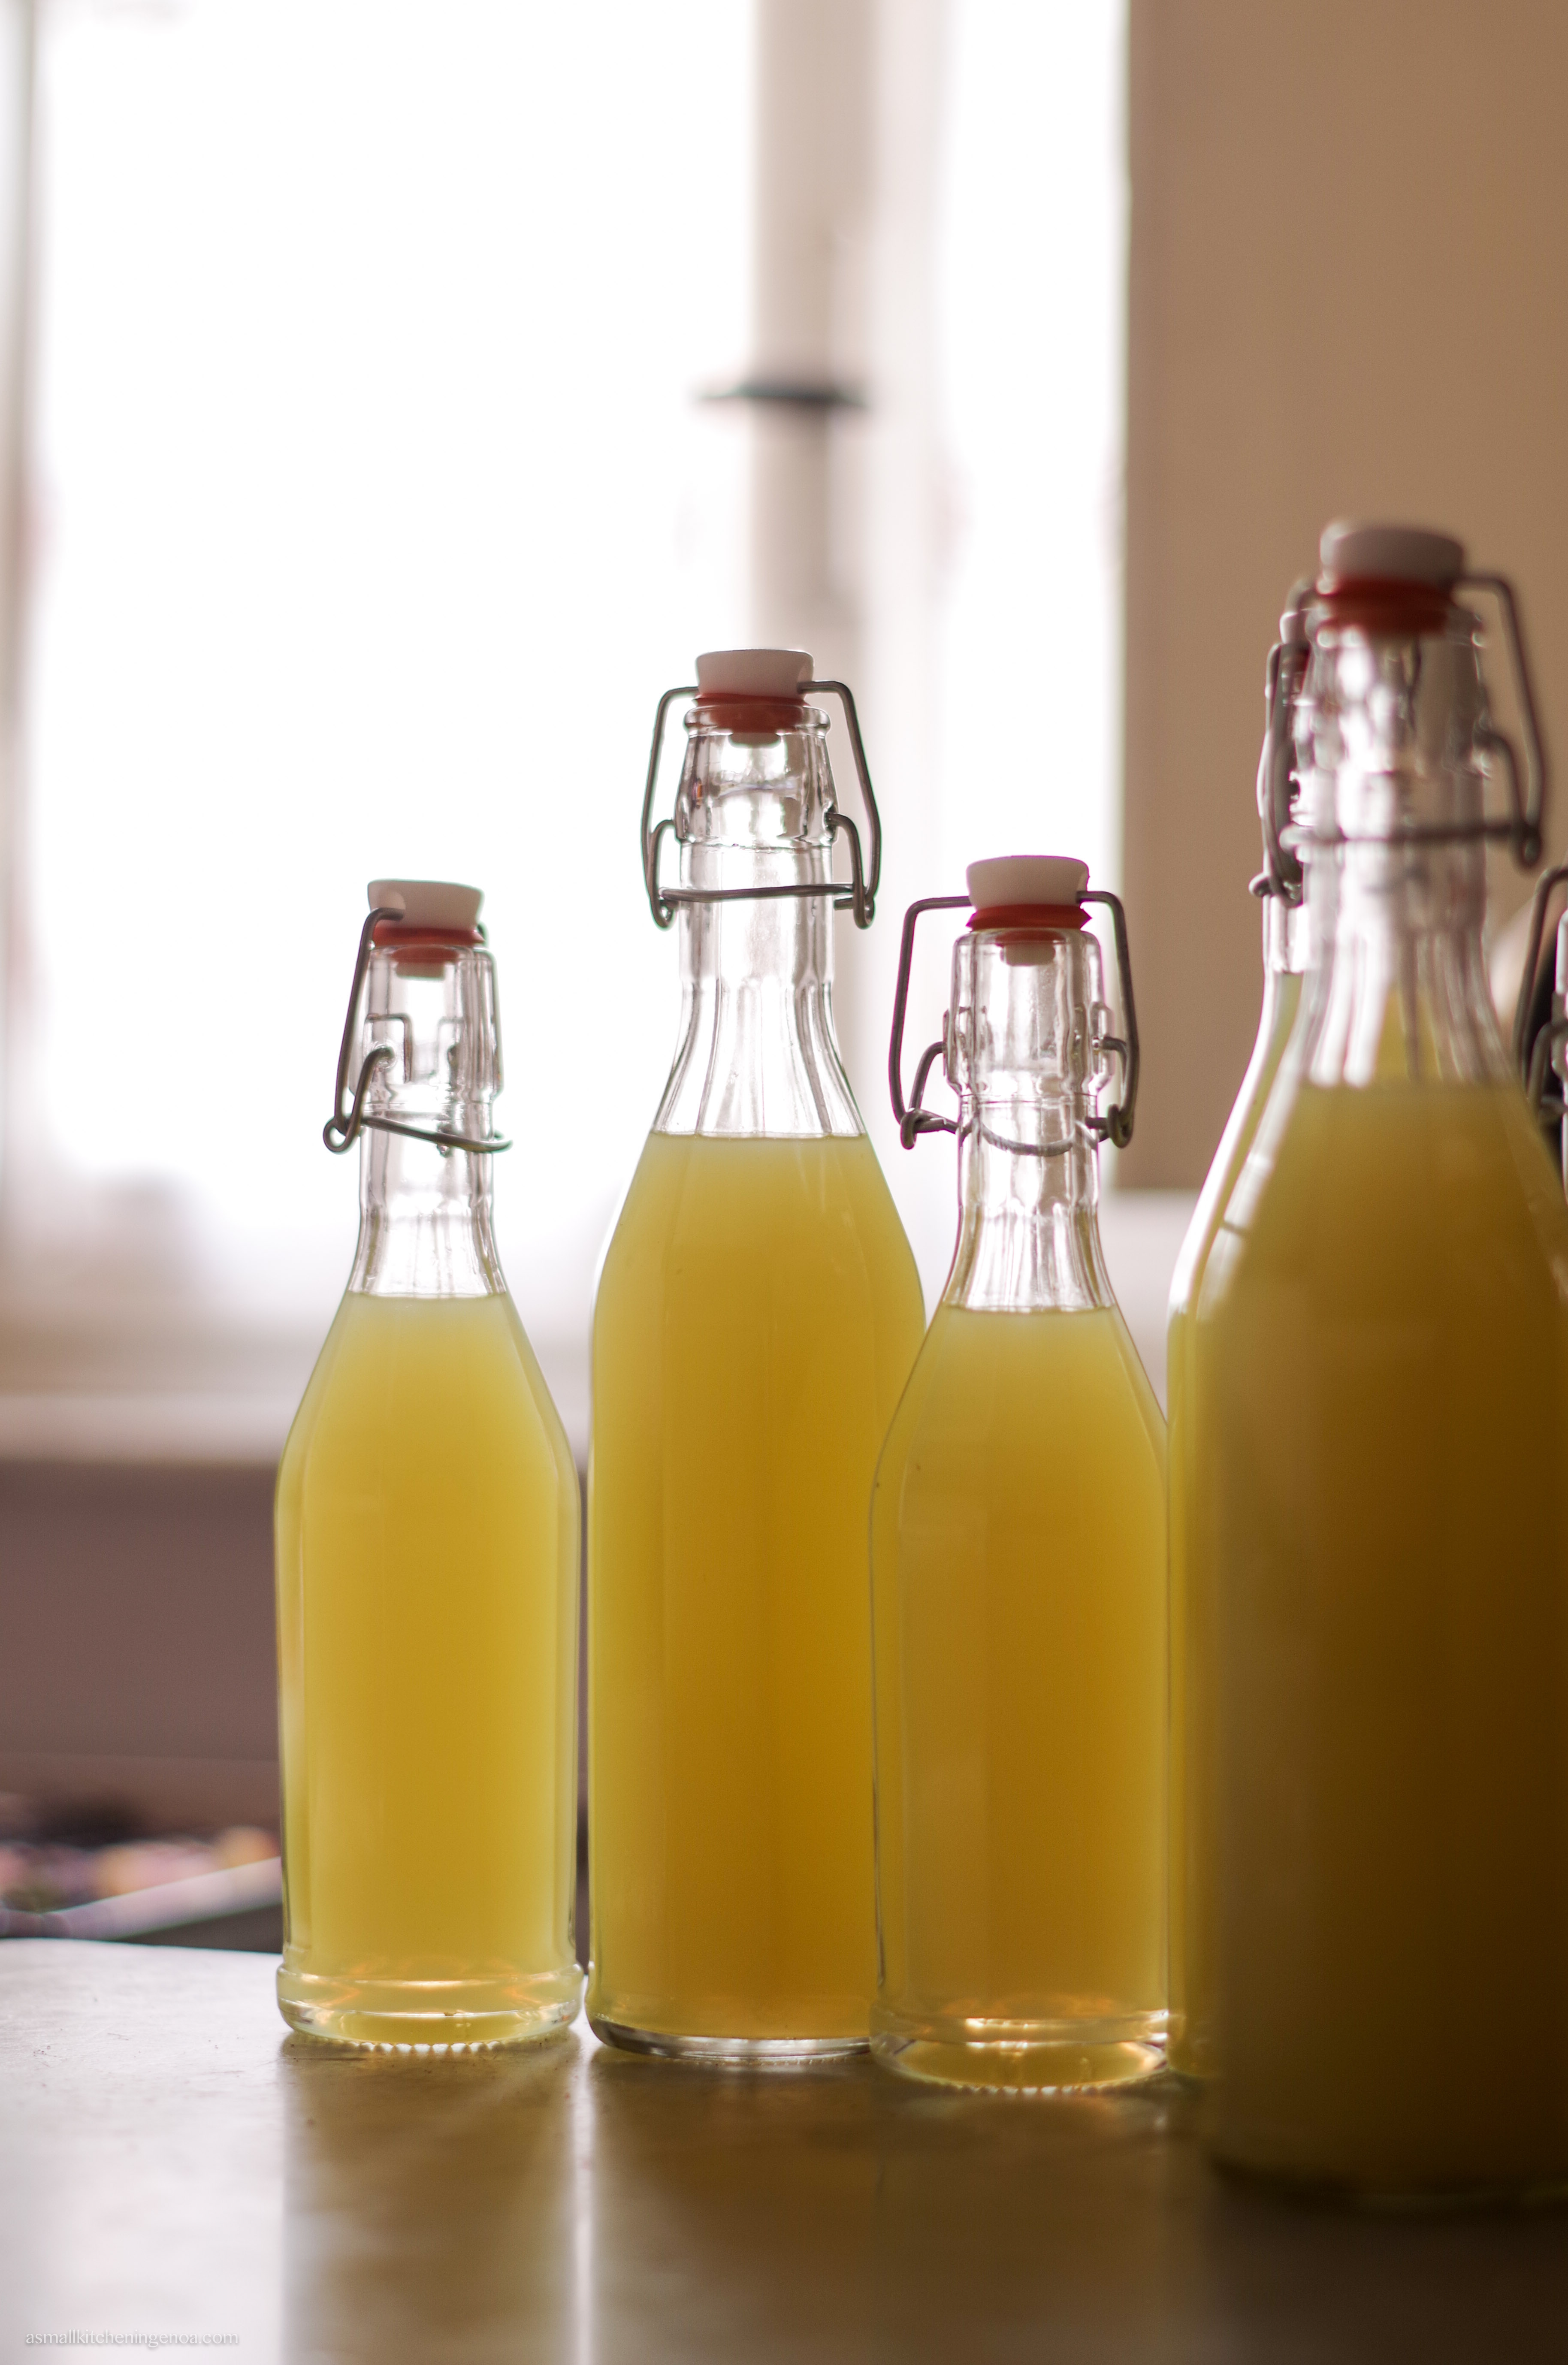 Italia limoncello recipe: the nectar just canned in the bottles